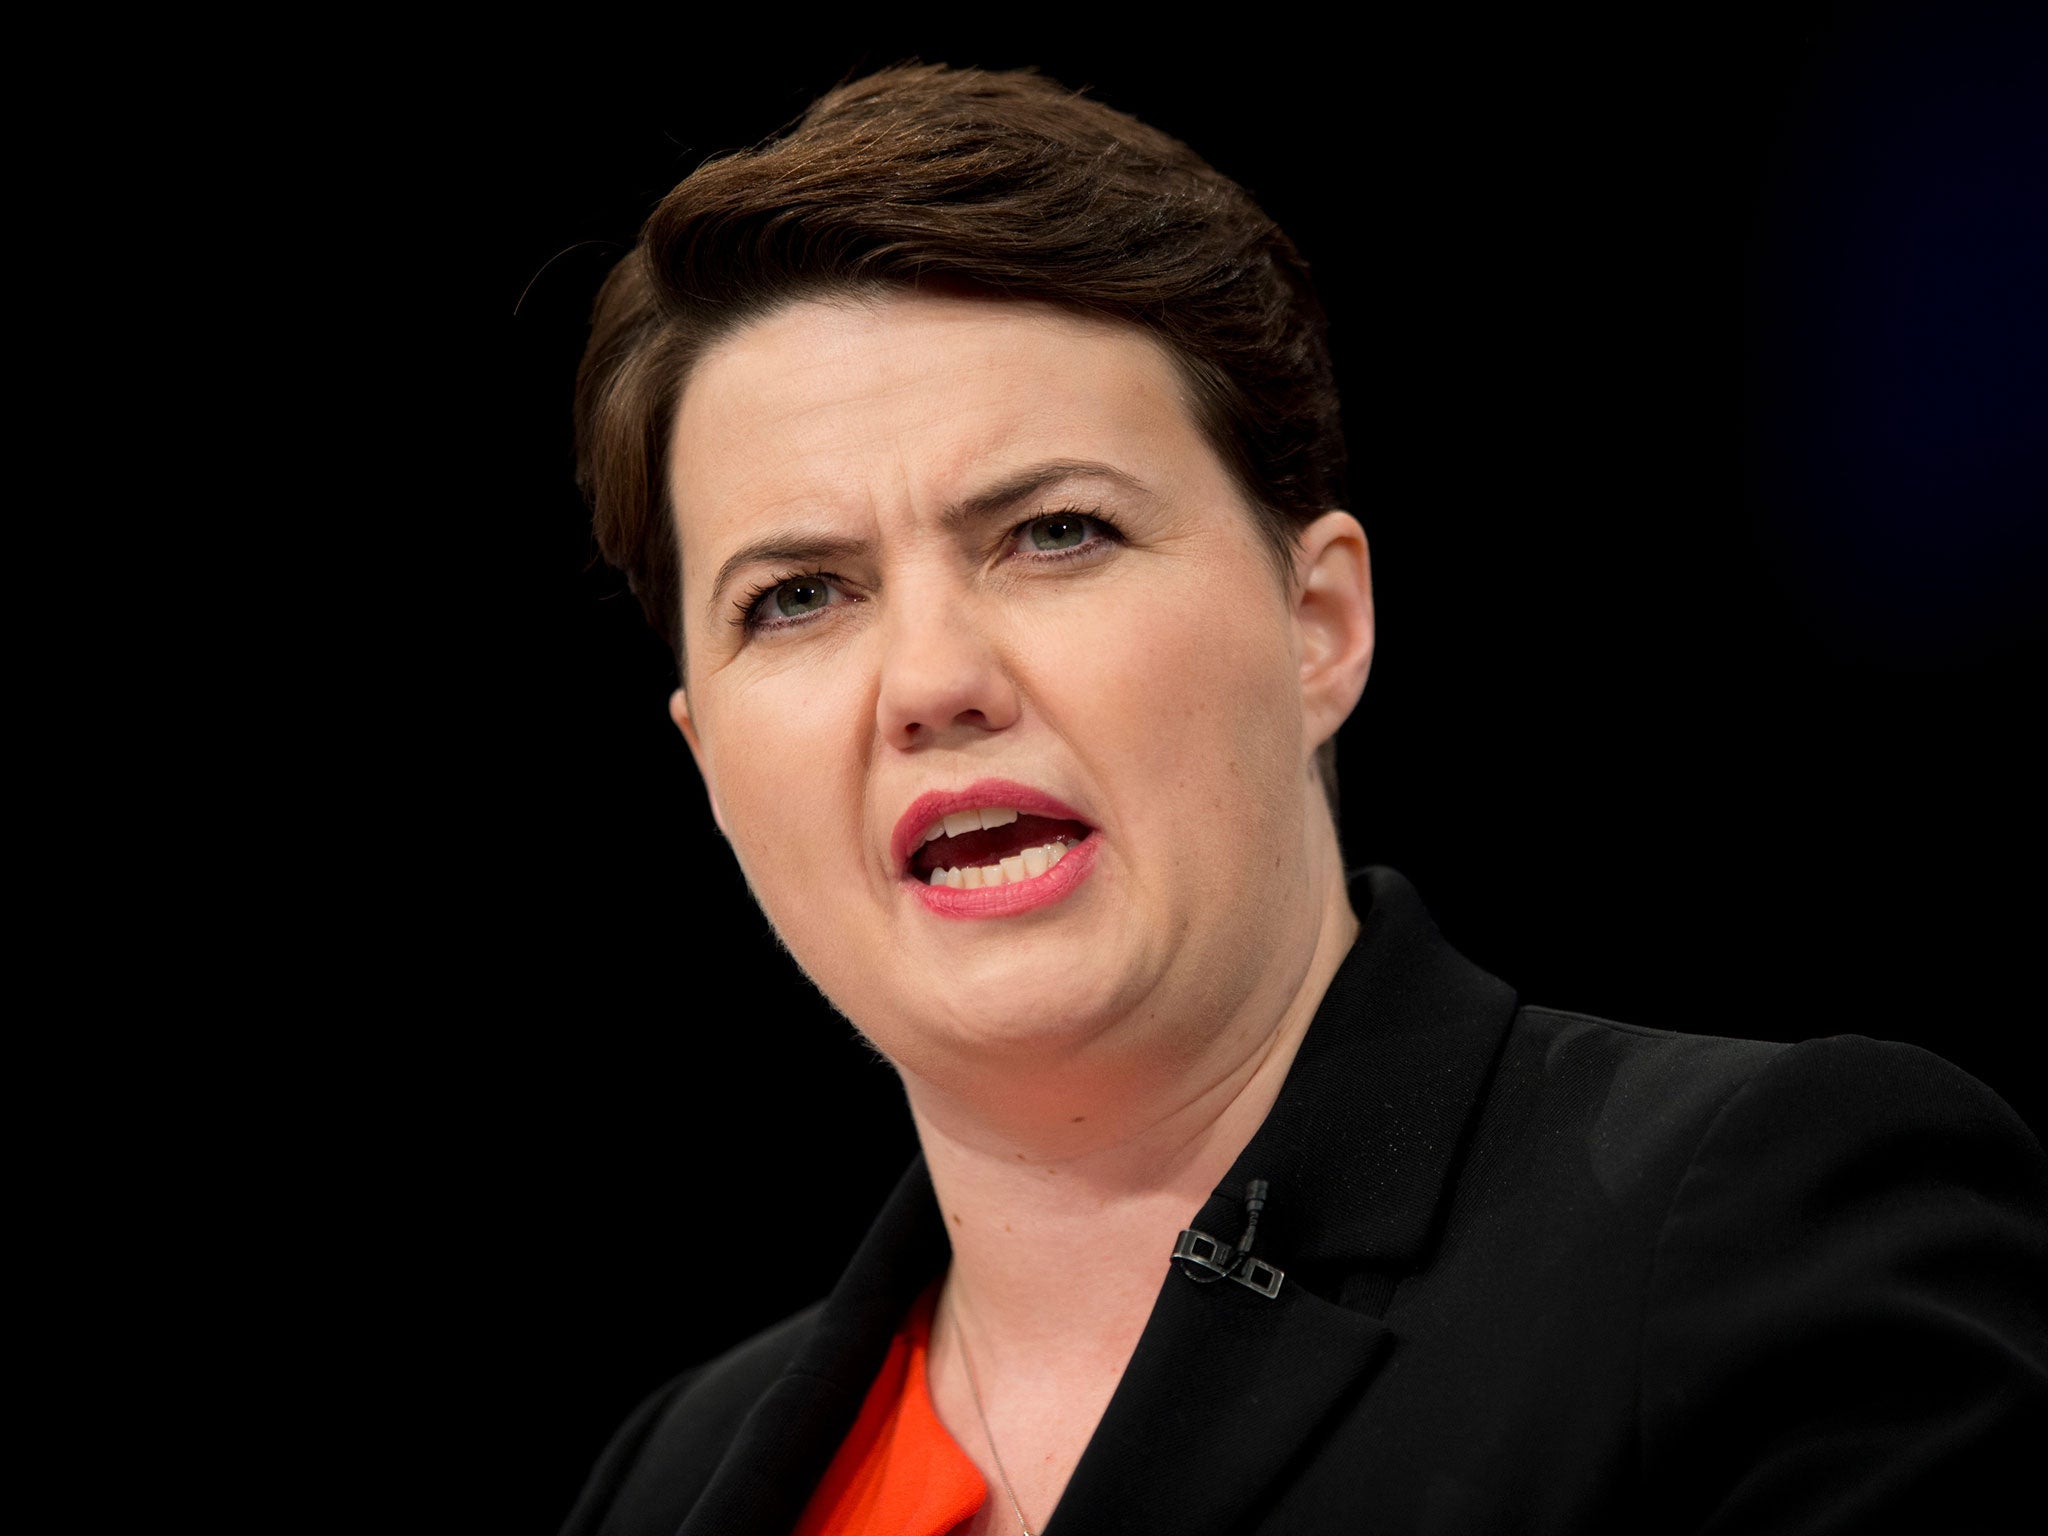 Ruth Davidson is hoping her party can oust Labour from its role as the official opposition at Holyrood in this week's Scottish Parliament elections